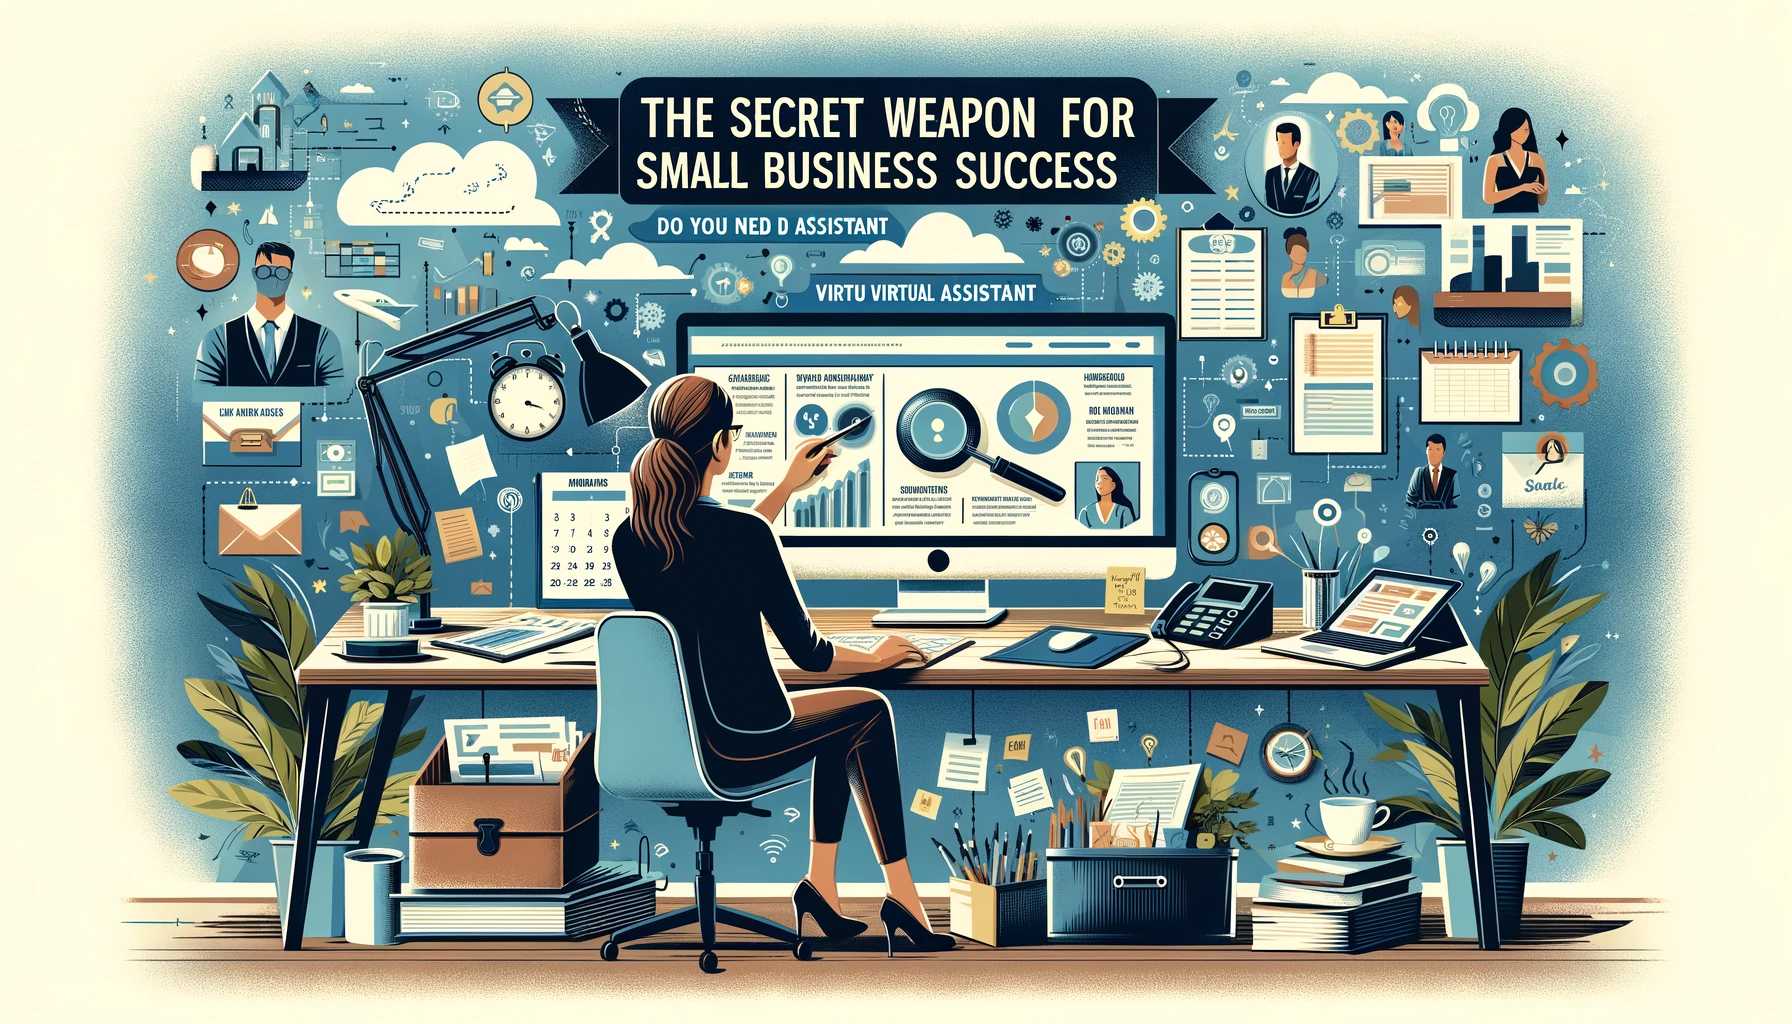 The Secret Weapon for Small Business Success: Do You Need a Virtual Assistant